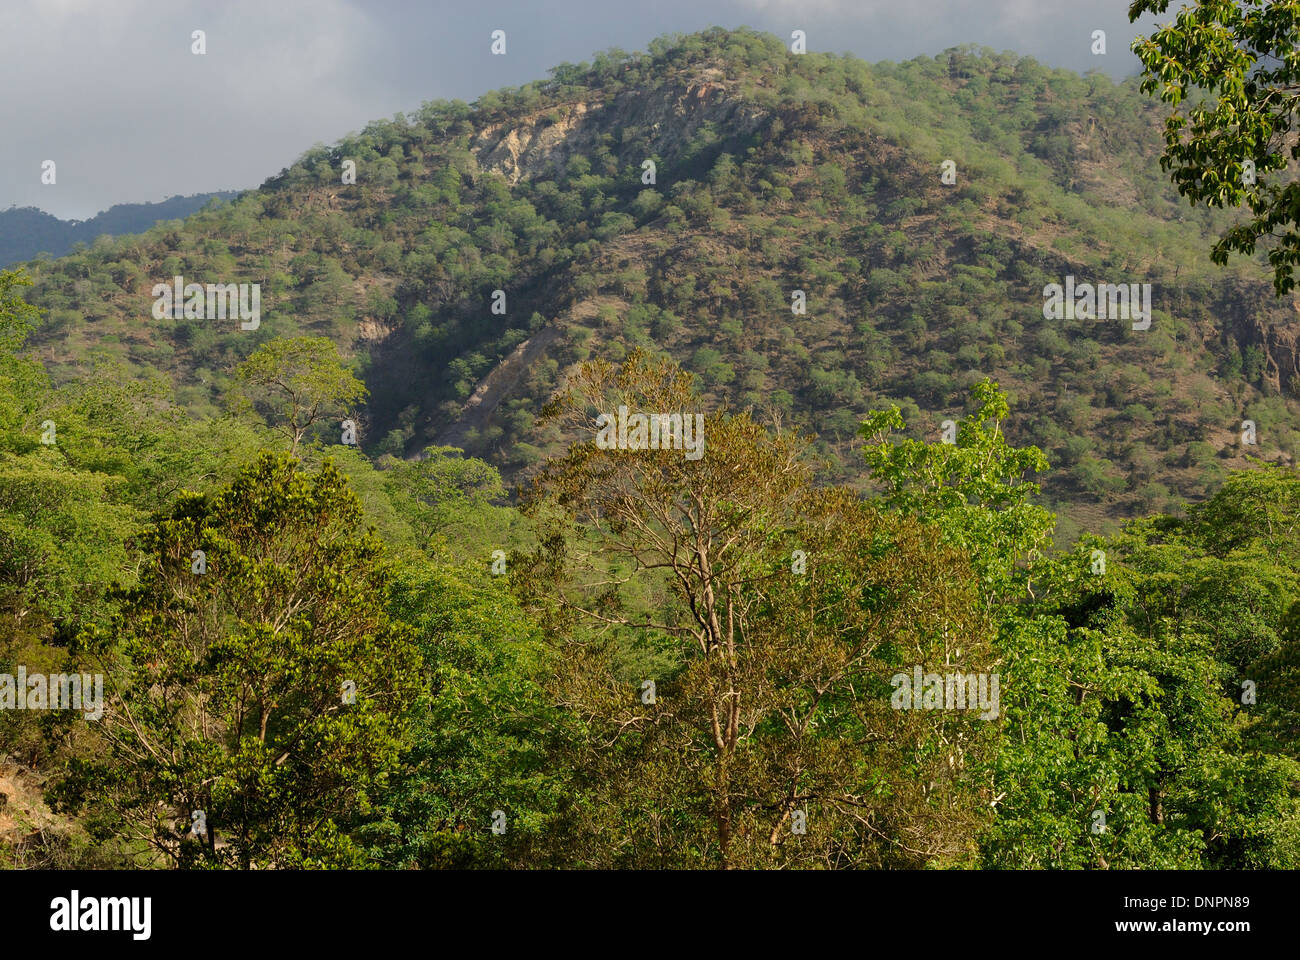 Day forest in Djibouti, Horn of Africa Stock Photo